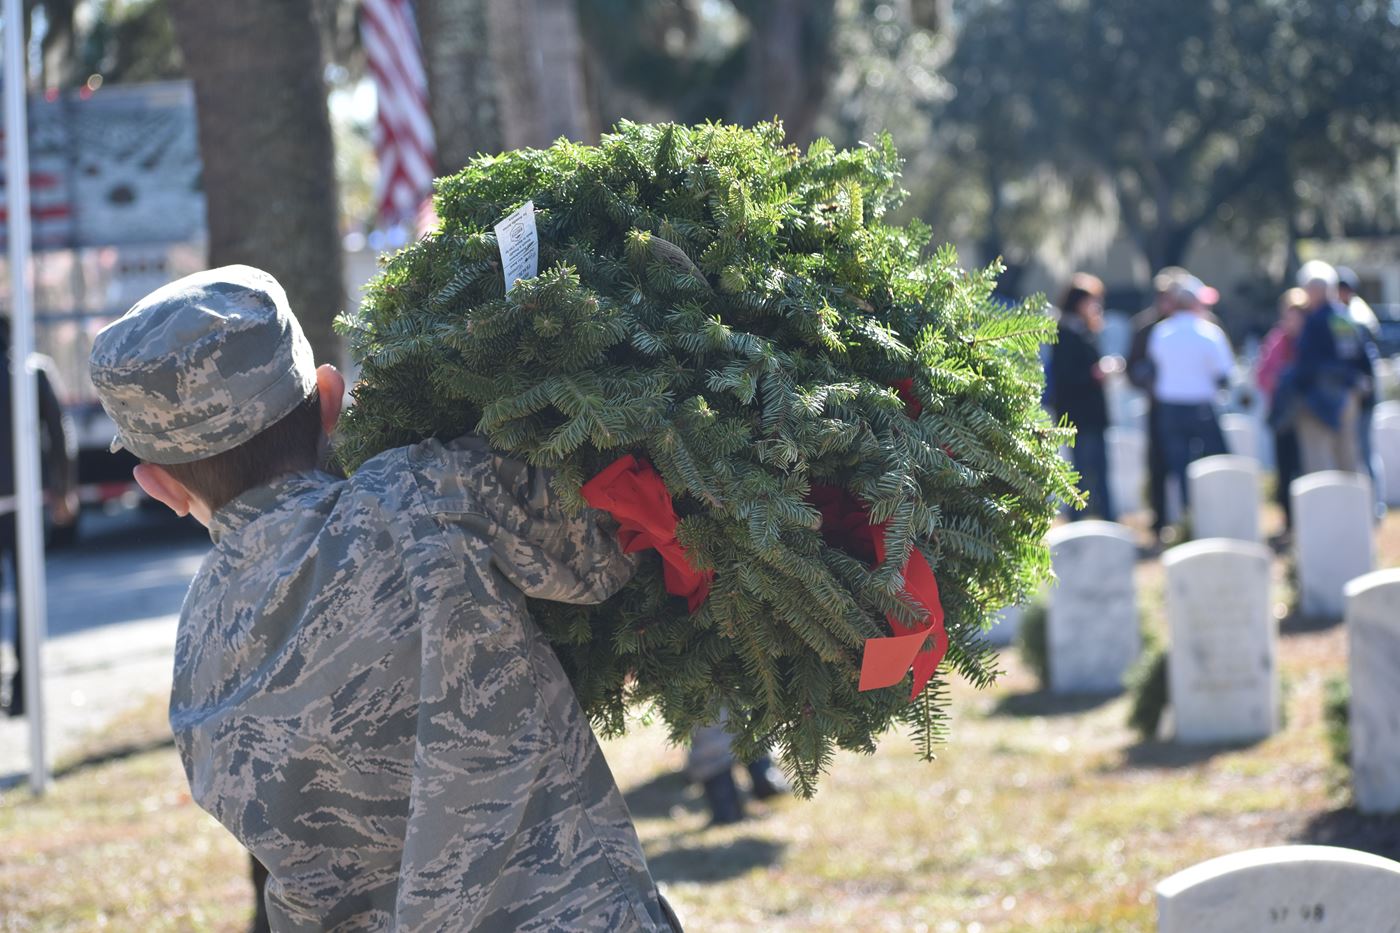 Cadet Qualls carries wreaths to a grave at Beaufort National Cemetery.